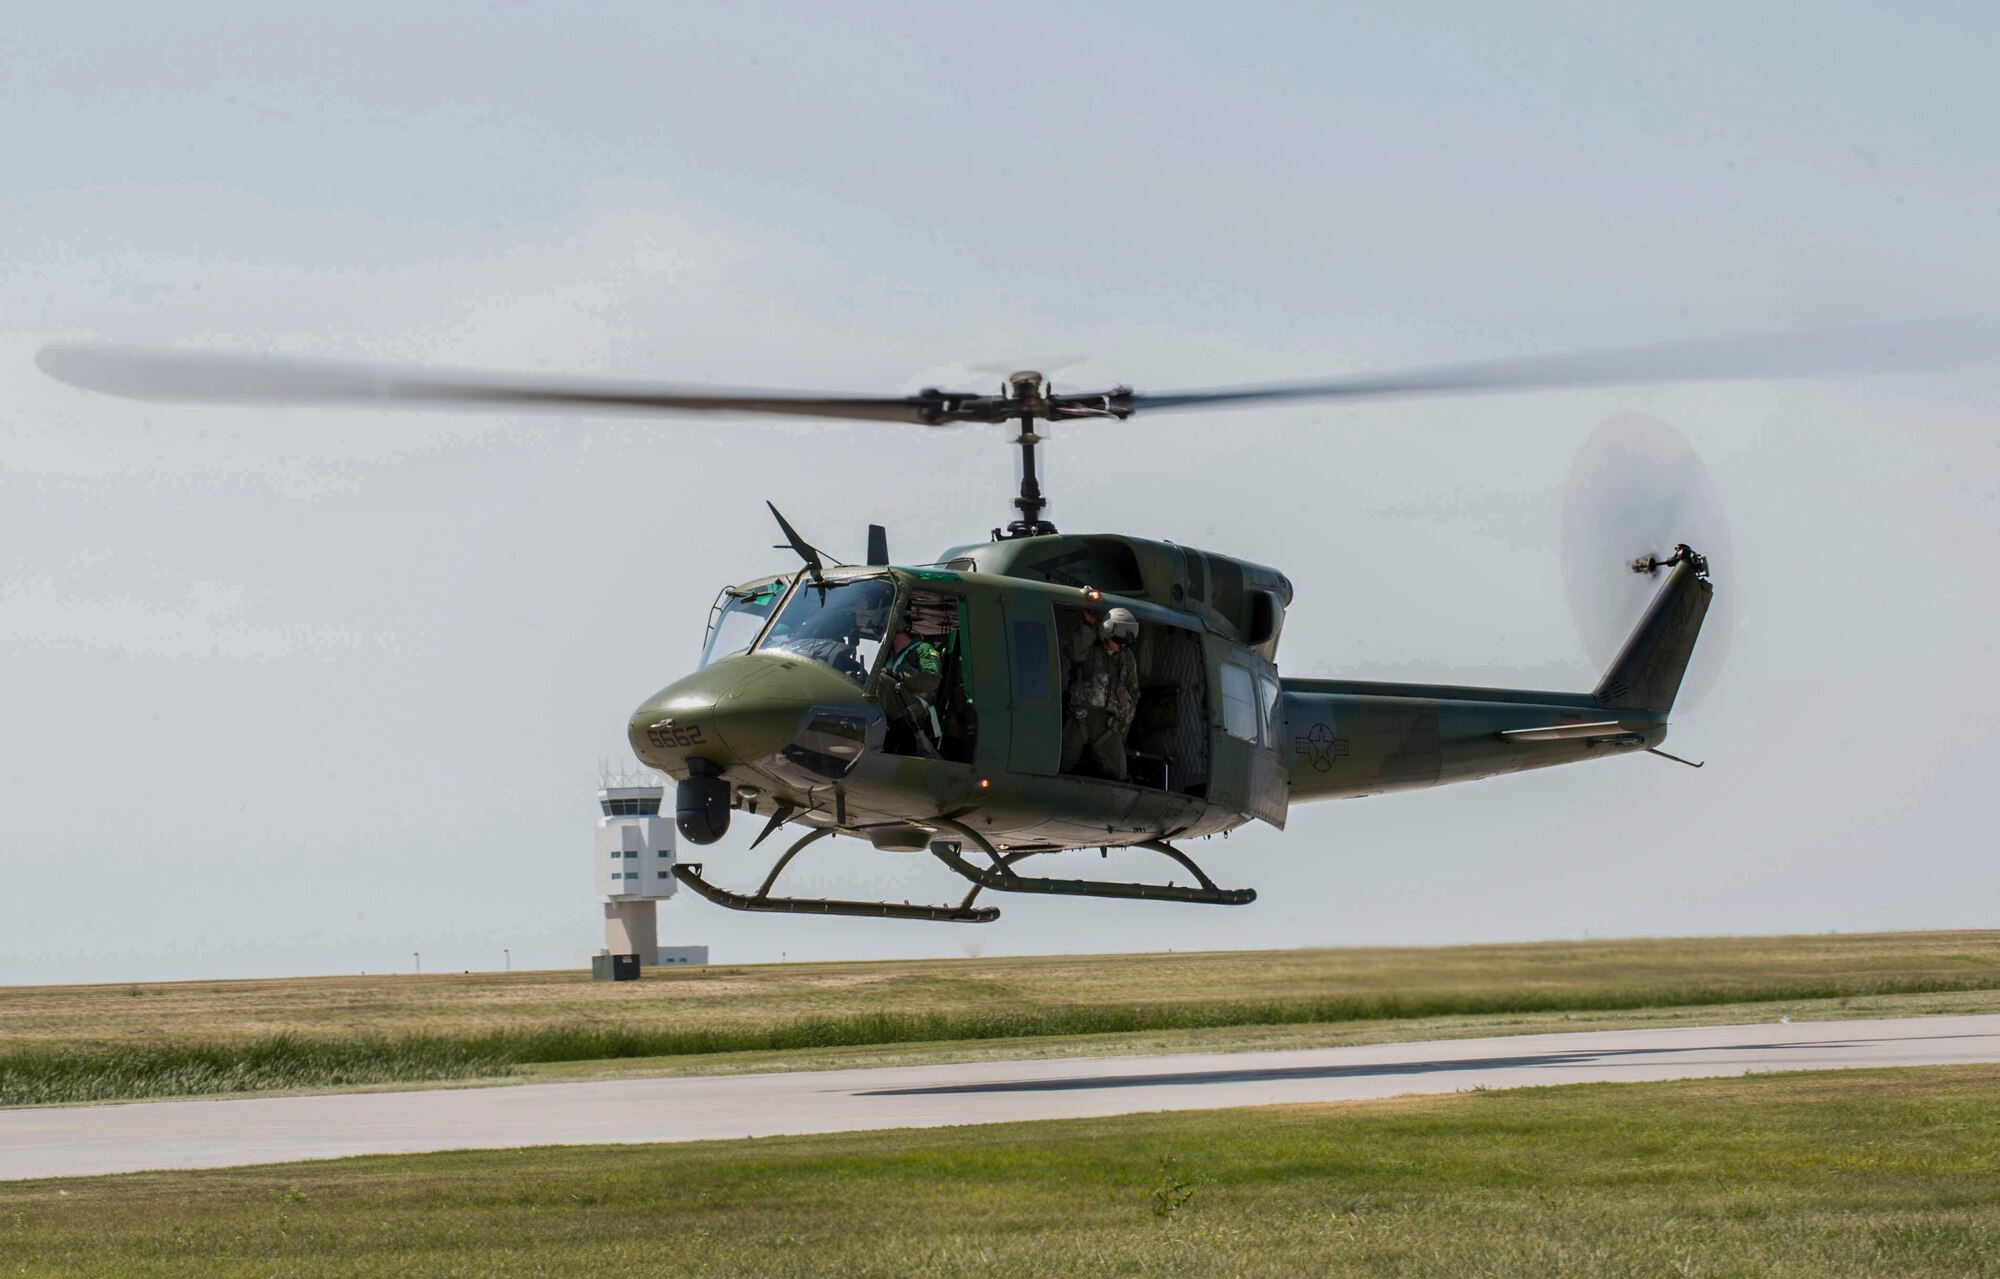 A UH-1N Helicopter from the 54th Helicopter Squadron takes off for a training mission at Minot Air Force Base, N.D., Aug. 4, 2015. The 54th HS will compete against two other helicopter squadron teams, the 37th HS from Francis E. Warren AFB, Wyoming and 40th HS from Malmstrom AFB, Montana, in Air Force Global Strike Command. (U.S. Air Force photo/Senior Airman Stephanie Morris)